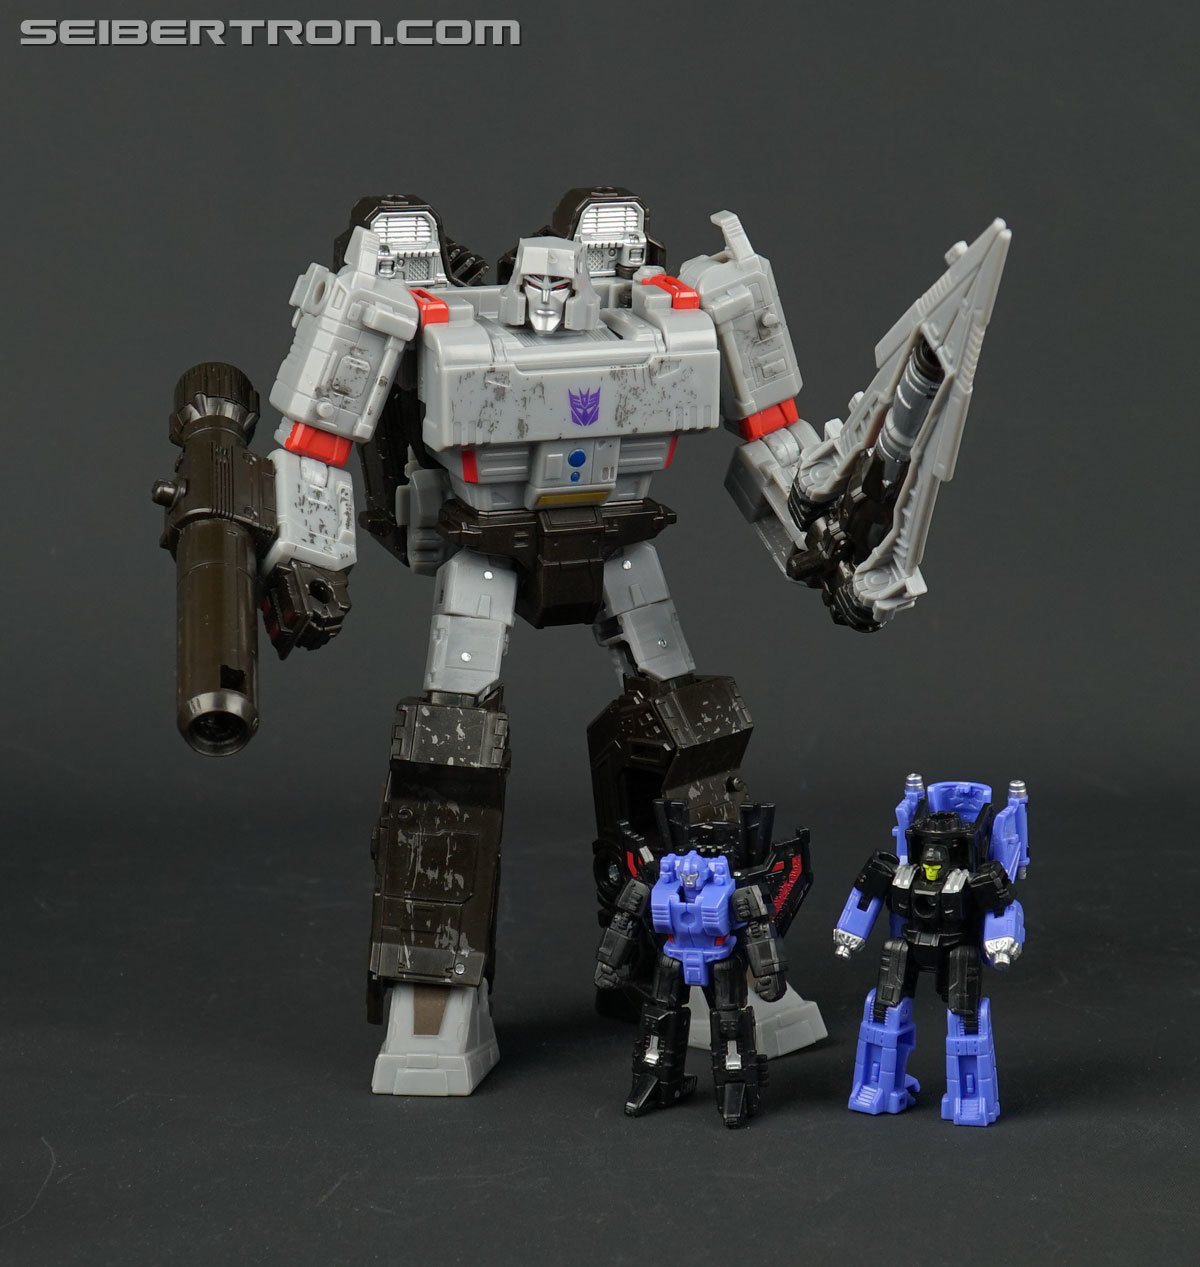 Transformers War for Cybertron: SIEGE Storm Cloud (Image #114 of 115)